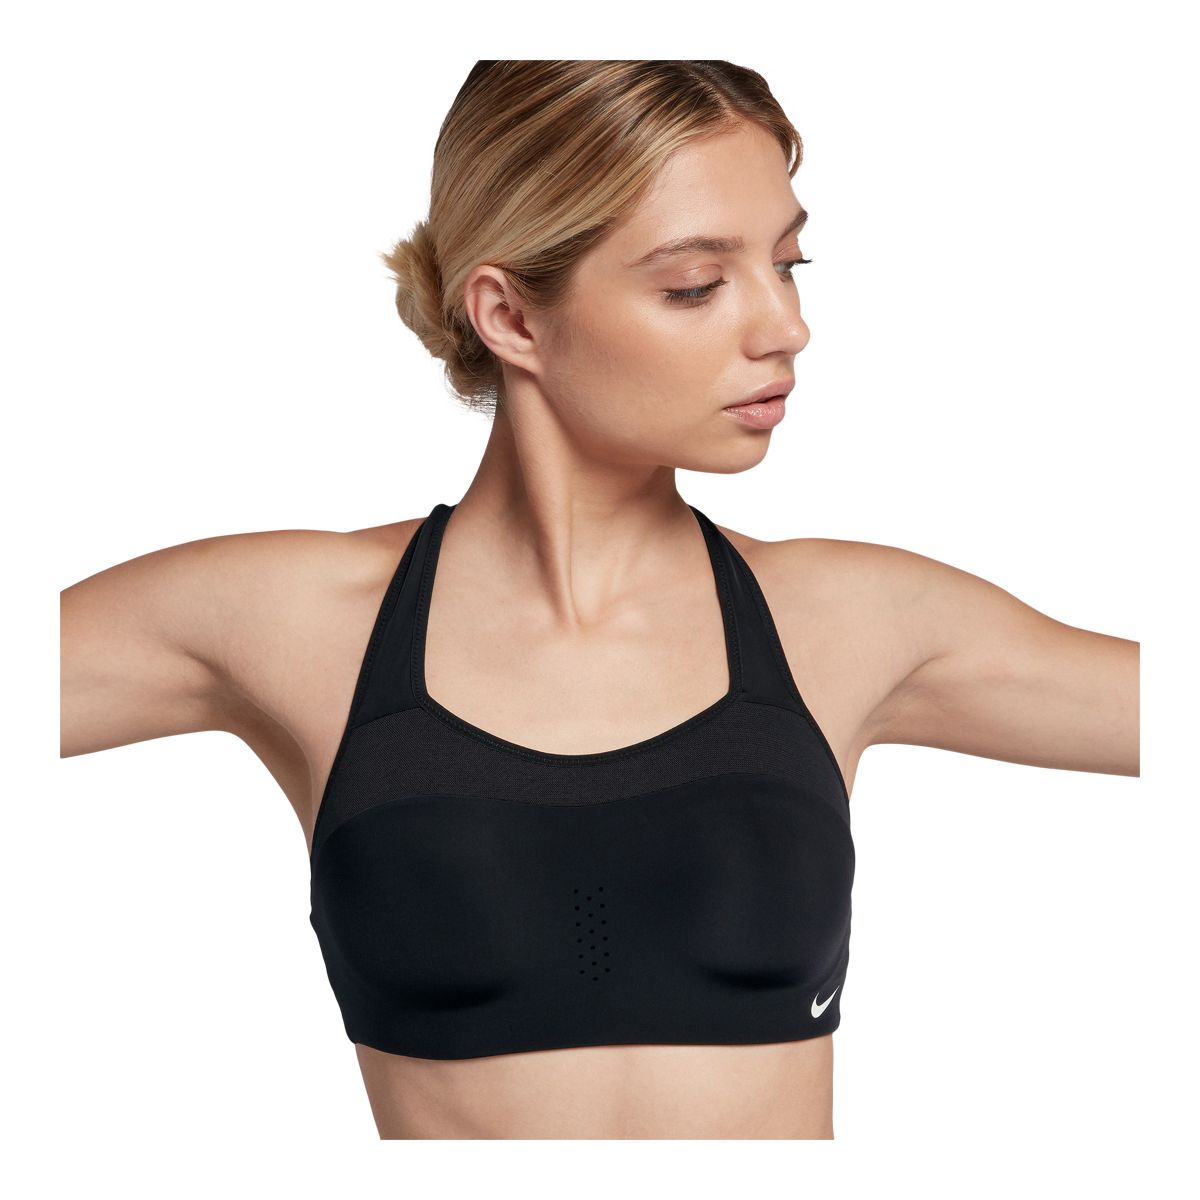 https://media-www.atmosphere.ca/product/div-03-softgoods/dpt-70-athletic-clothing/sdpt-02-womens/332542148/nike-w-pro-alpha-high-pd-ad-d-black-s--6a918ba8-38e9-497e-8ab7-53ddae38b7c8-jpgrendition.jpg